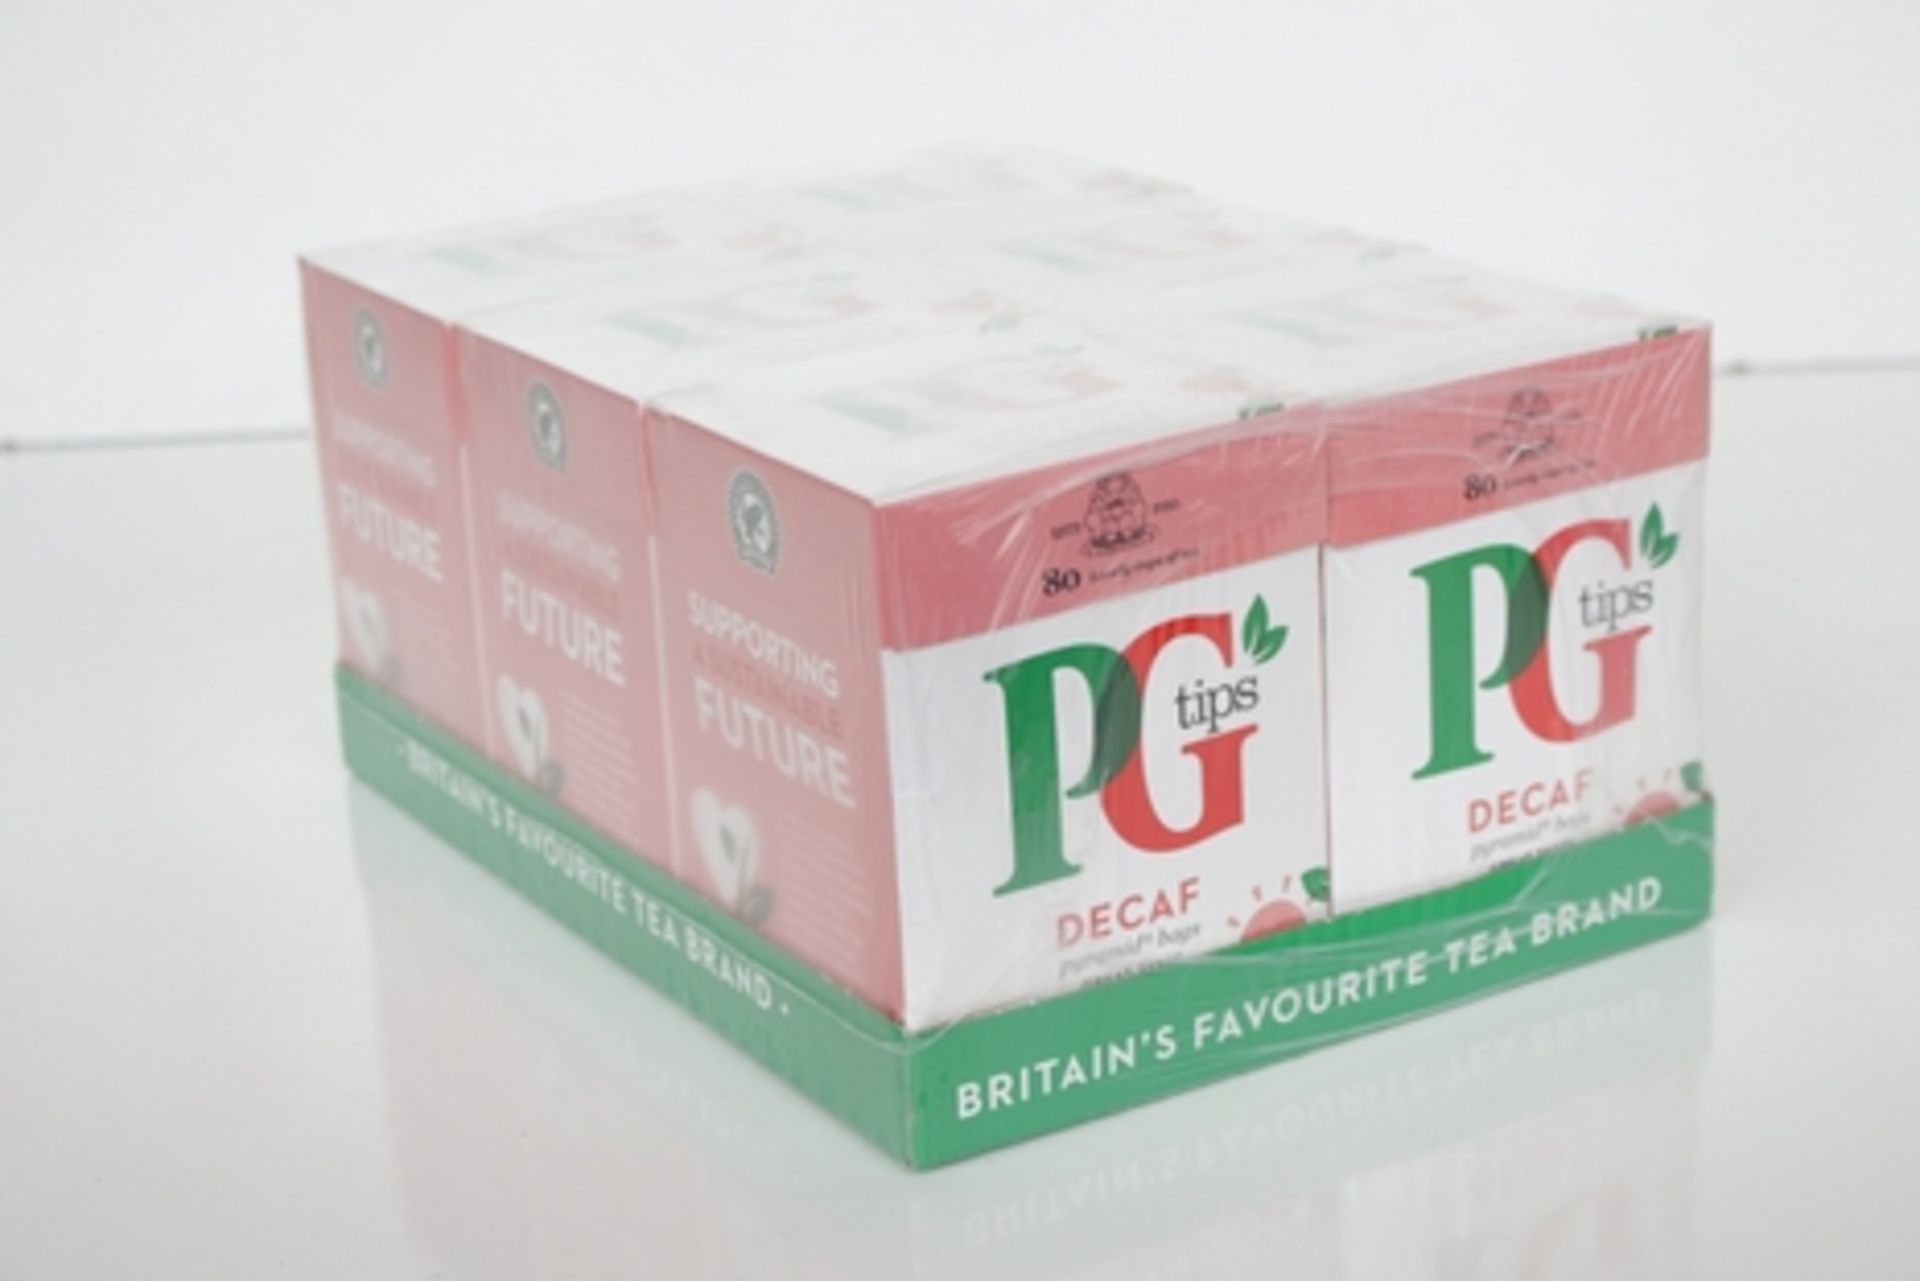 1 LOT TO CONTAIN 24 PACKS OF PG TIPS DECAF (IN 4 BOXES) (136) (AC-ROCK)